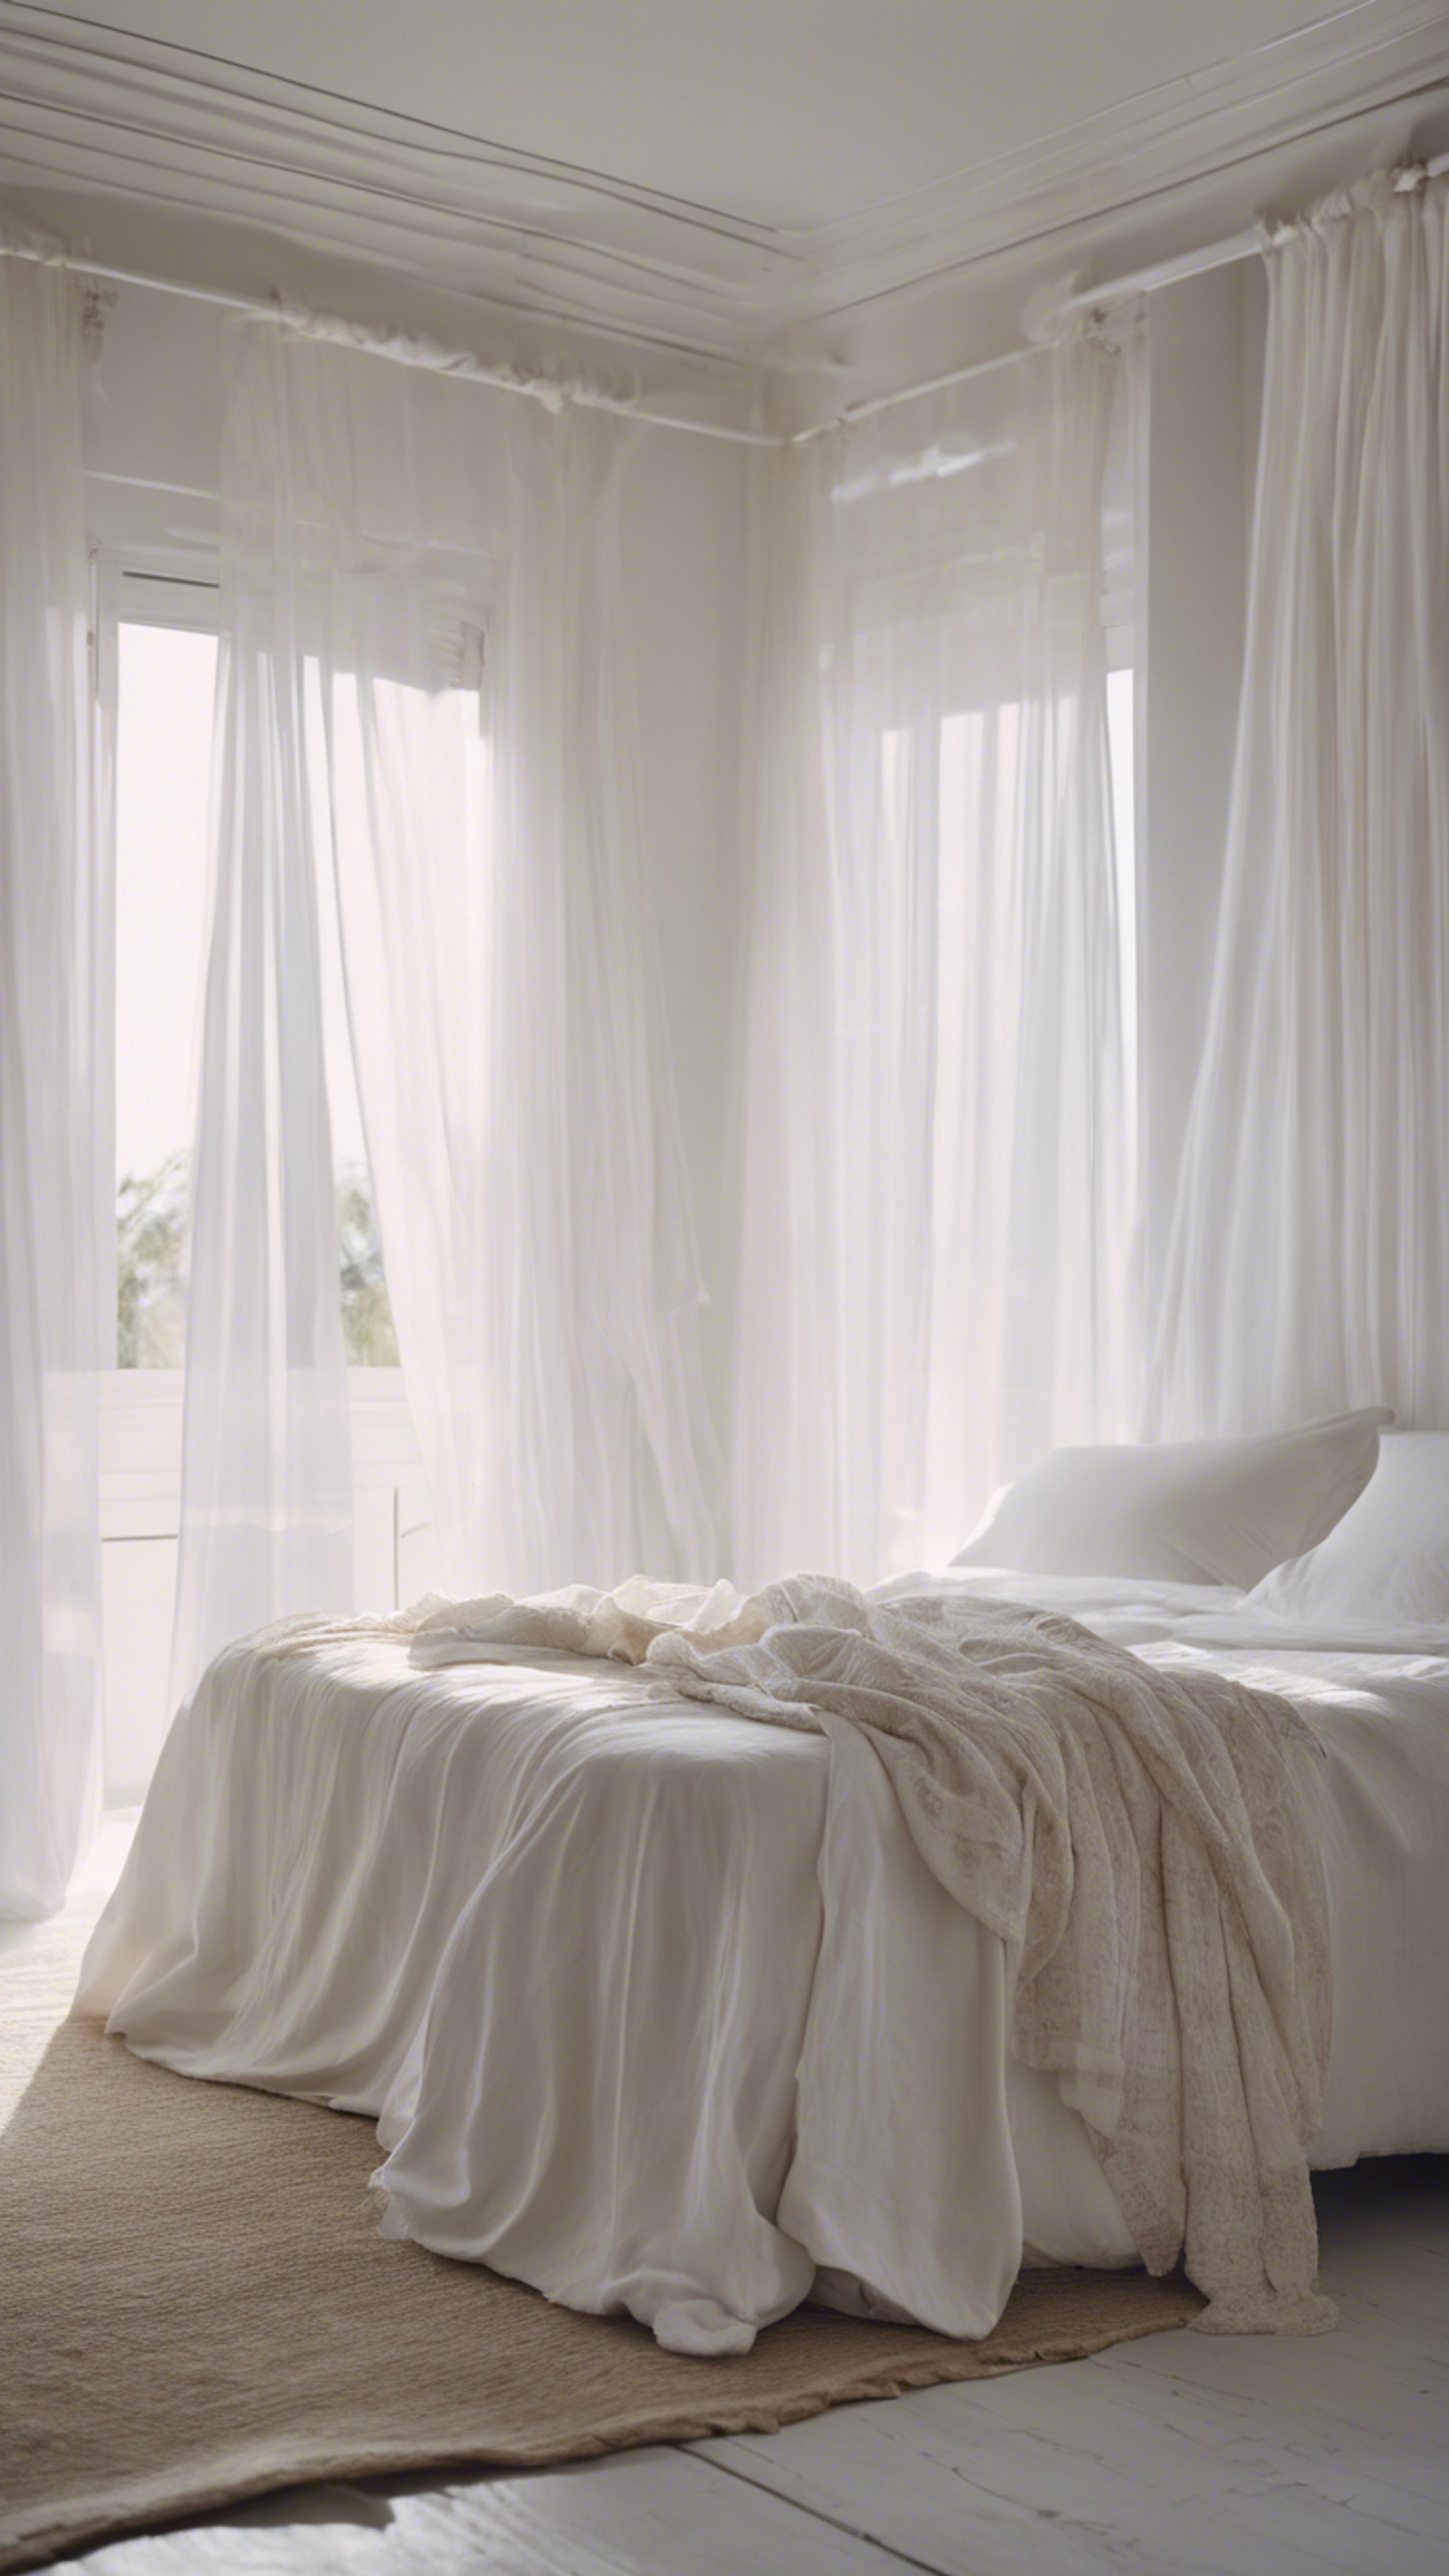 A dreamy white bedroom with sheer curtains blowing in the wind, white bed linens and an array of daylight from the window. Hình nền[01f8a65ac1ab4b5d8d2d]